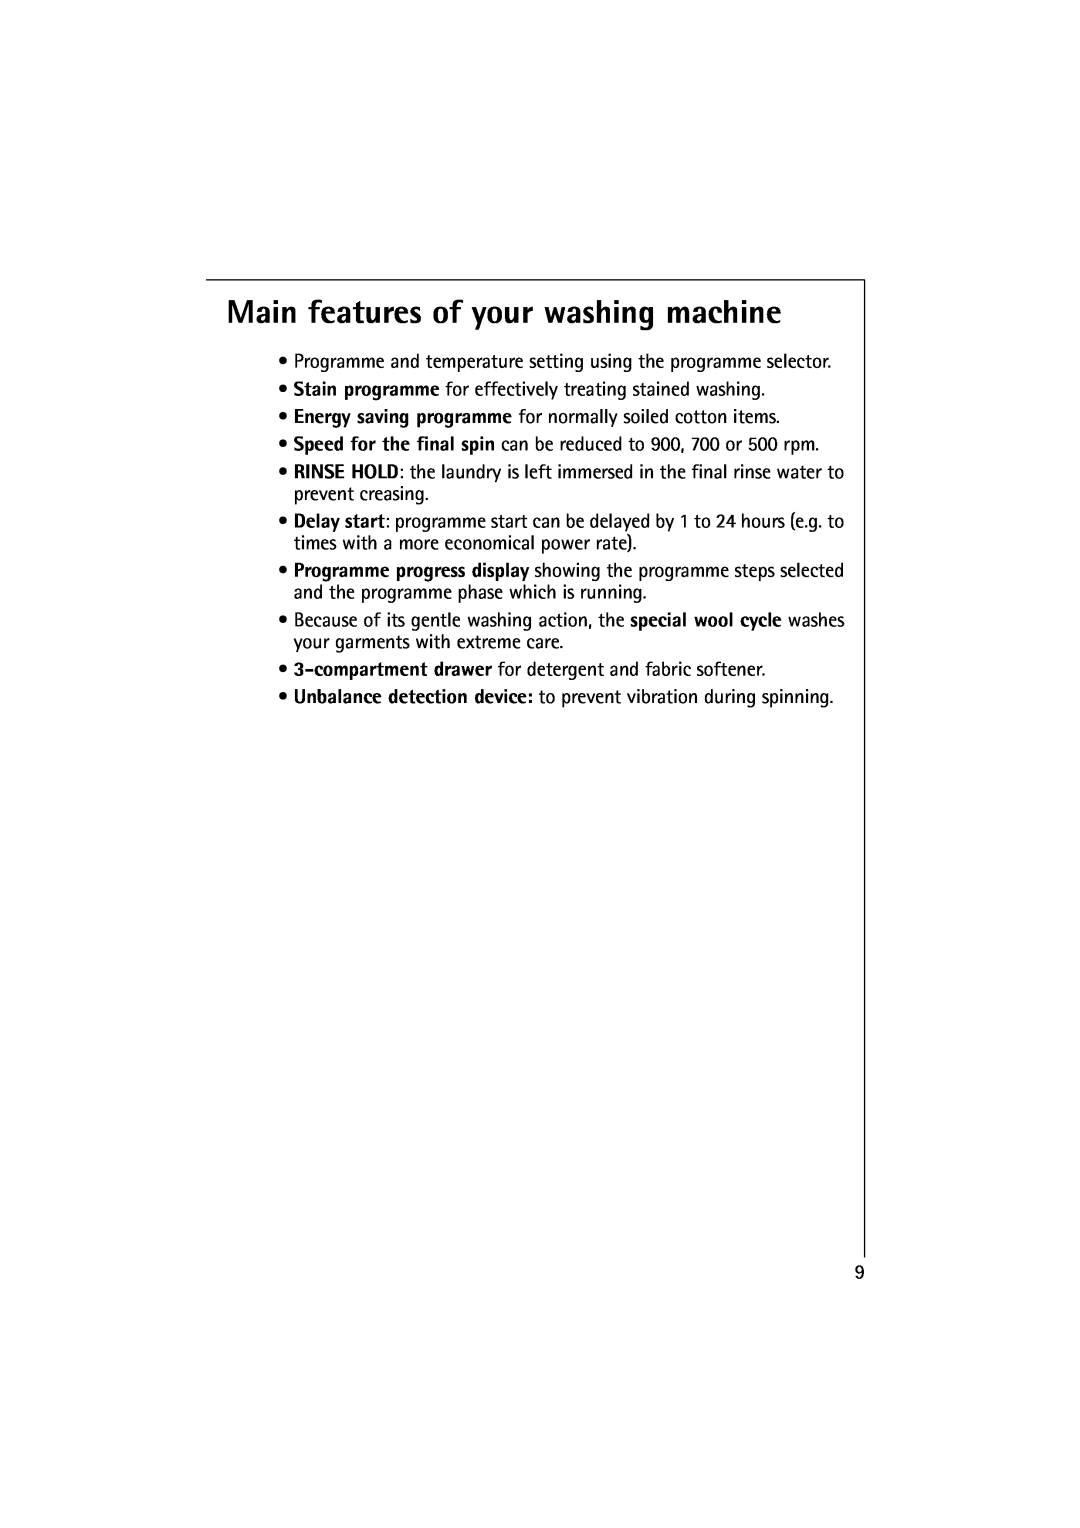 Electrolux 10500 VI manual Main features of your washing machine 